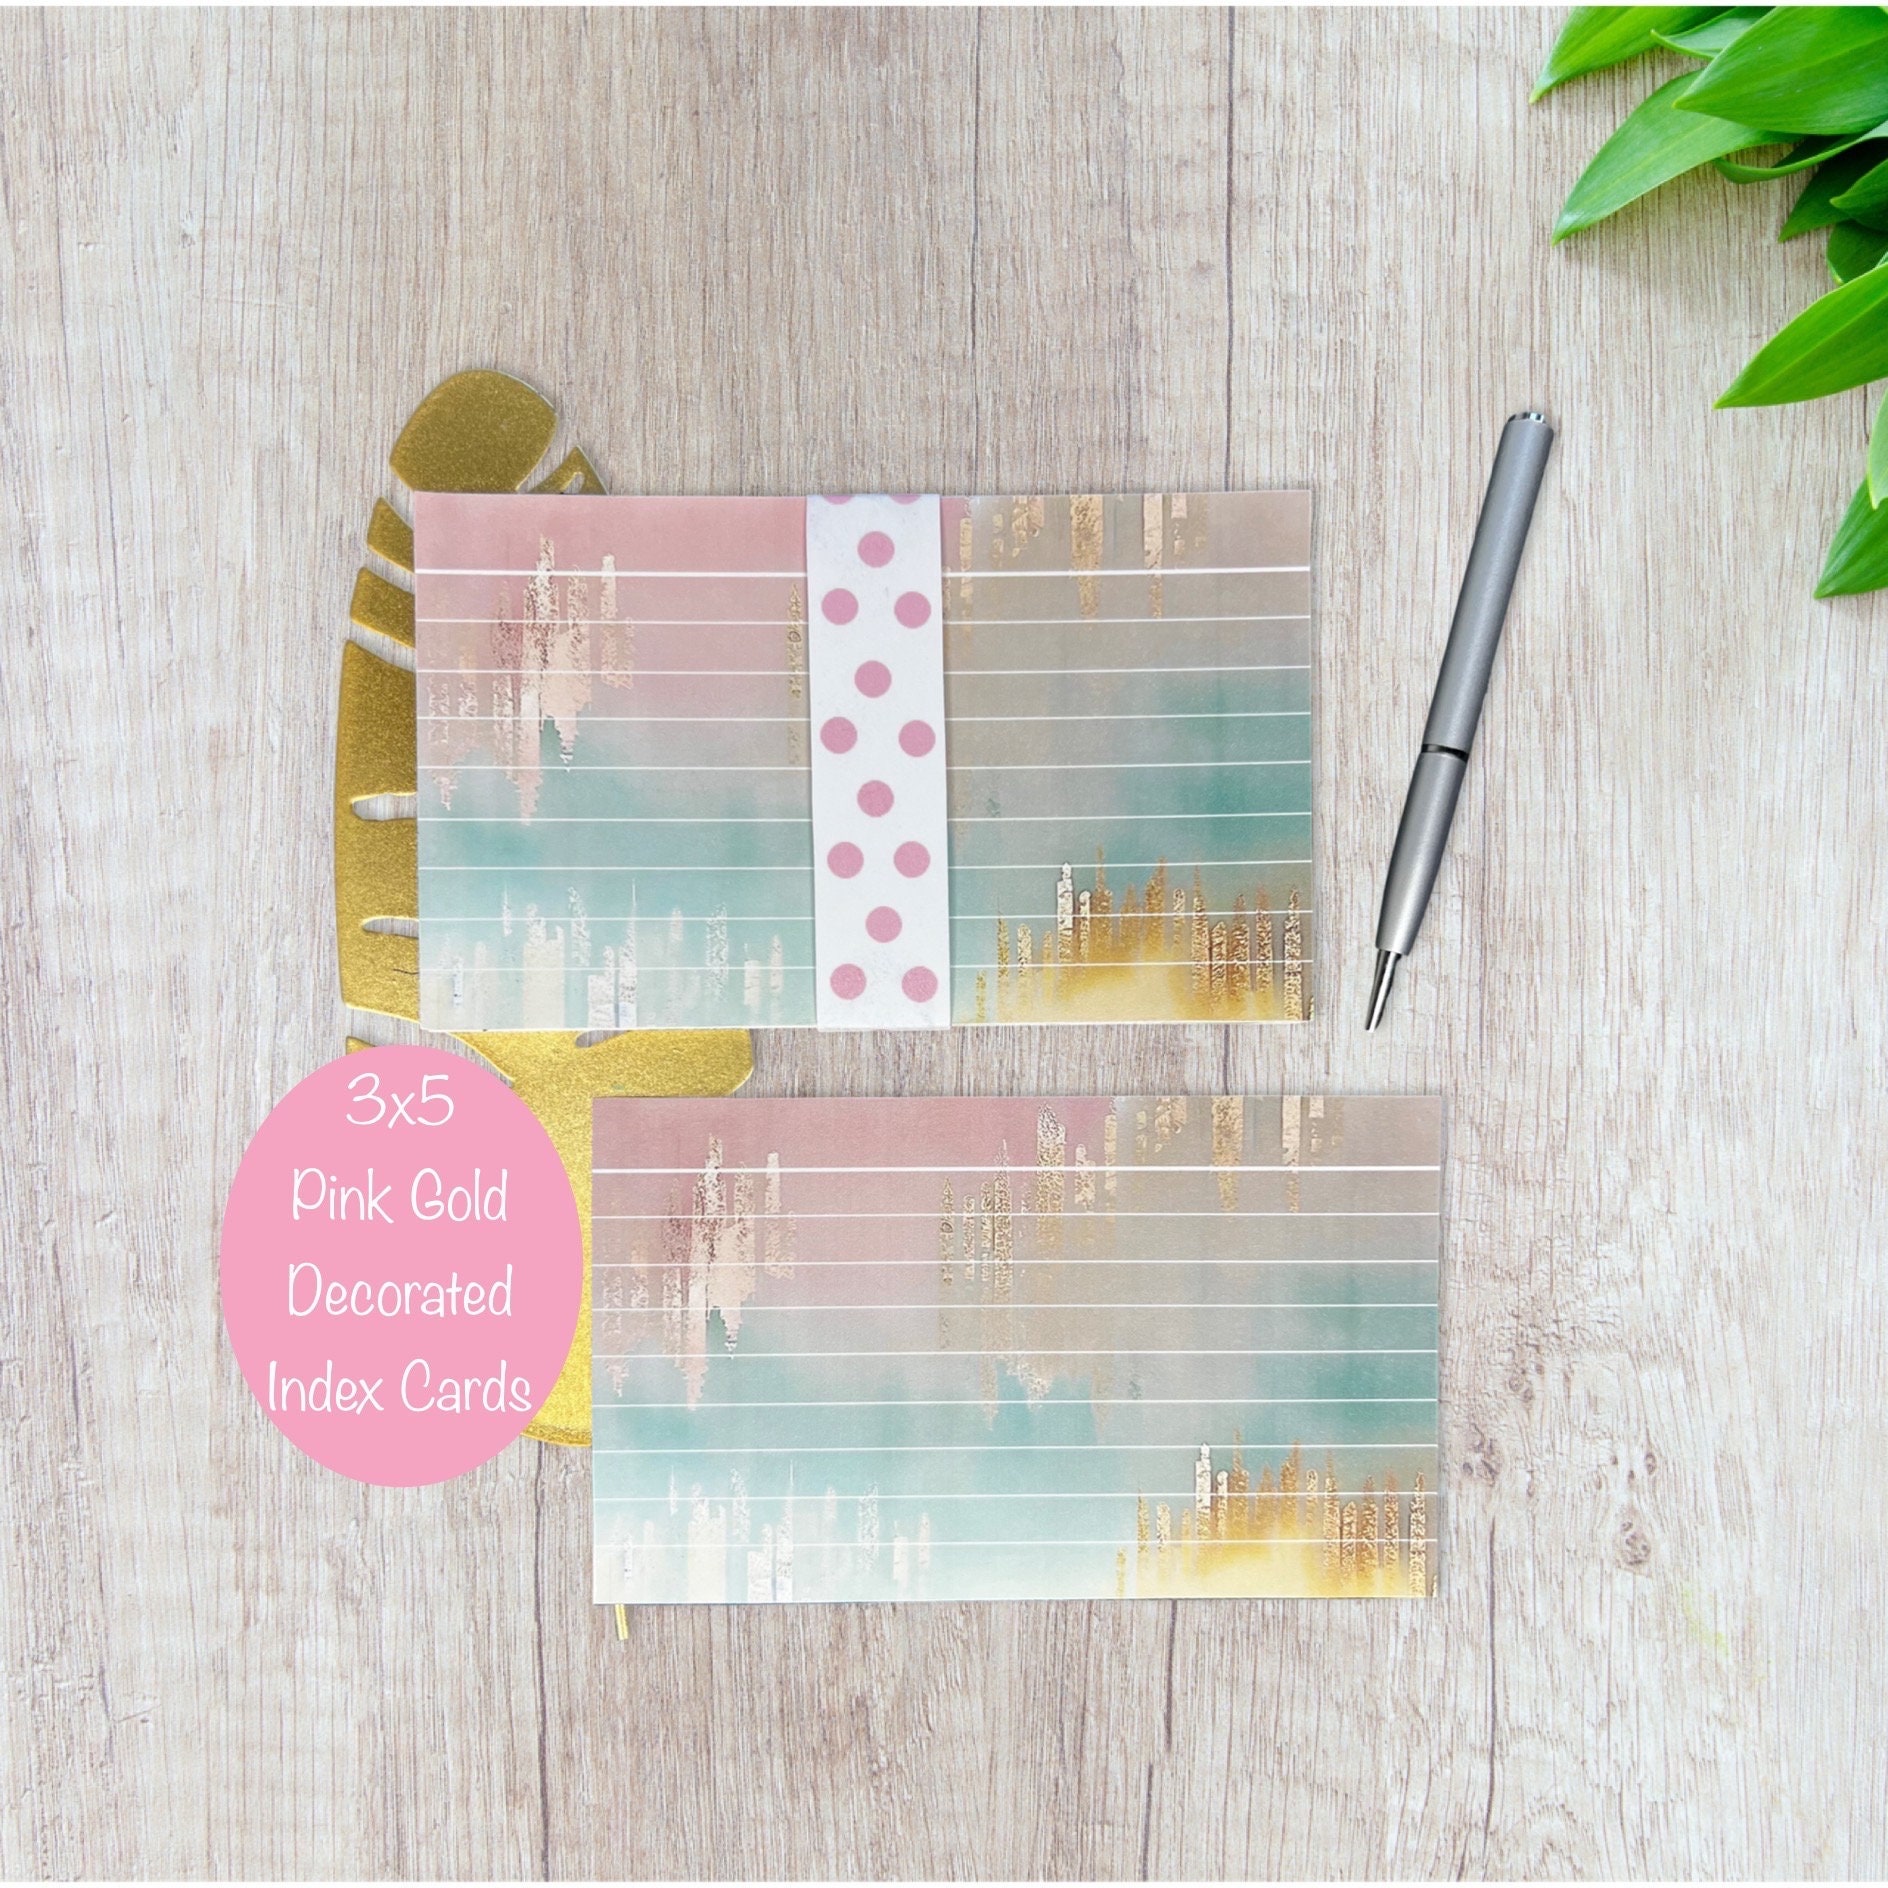 3x5 Just Date Dividers, Index Card Dividers Printable for Planning